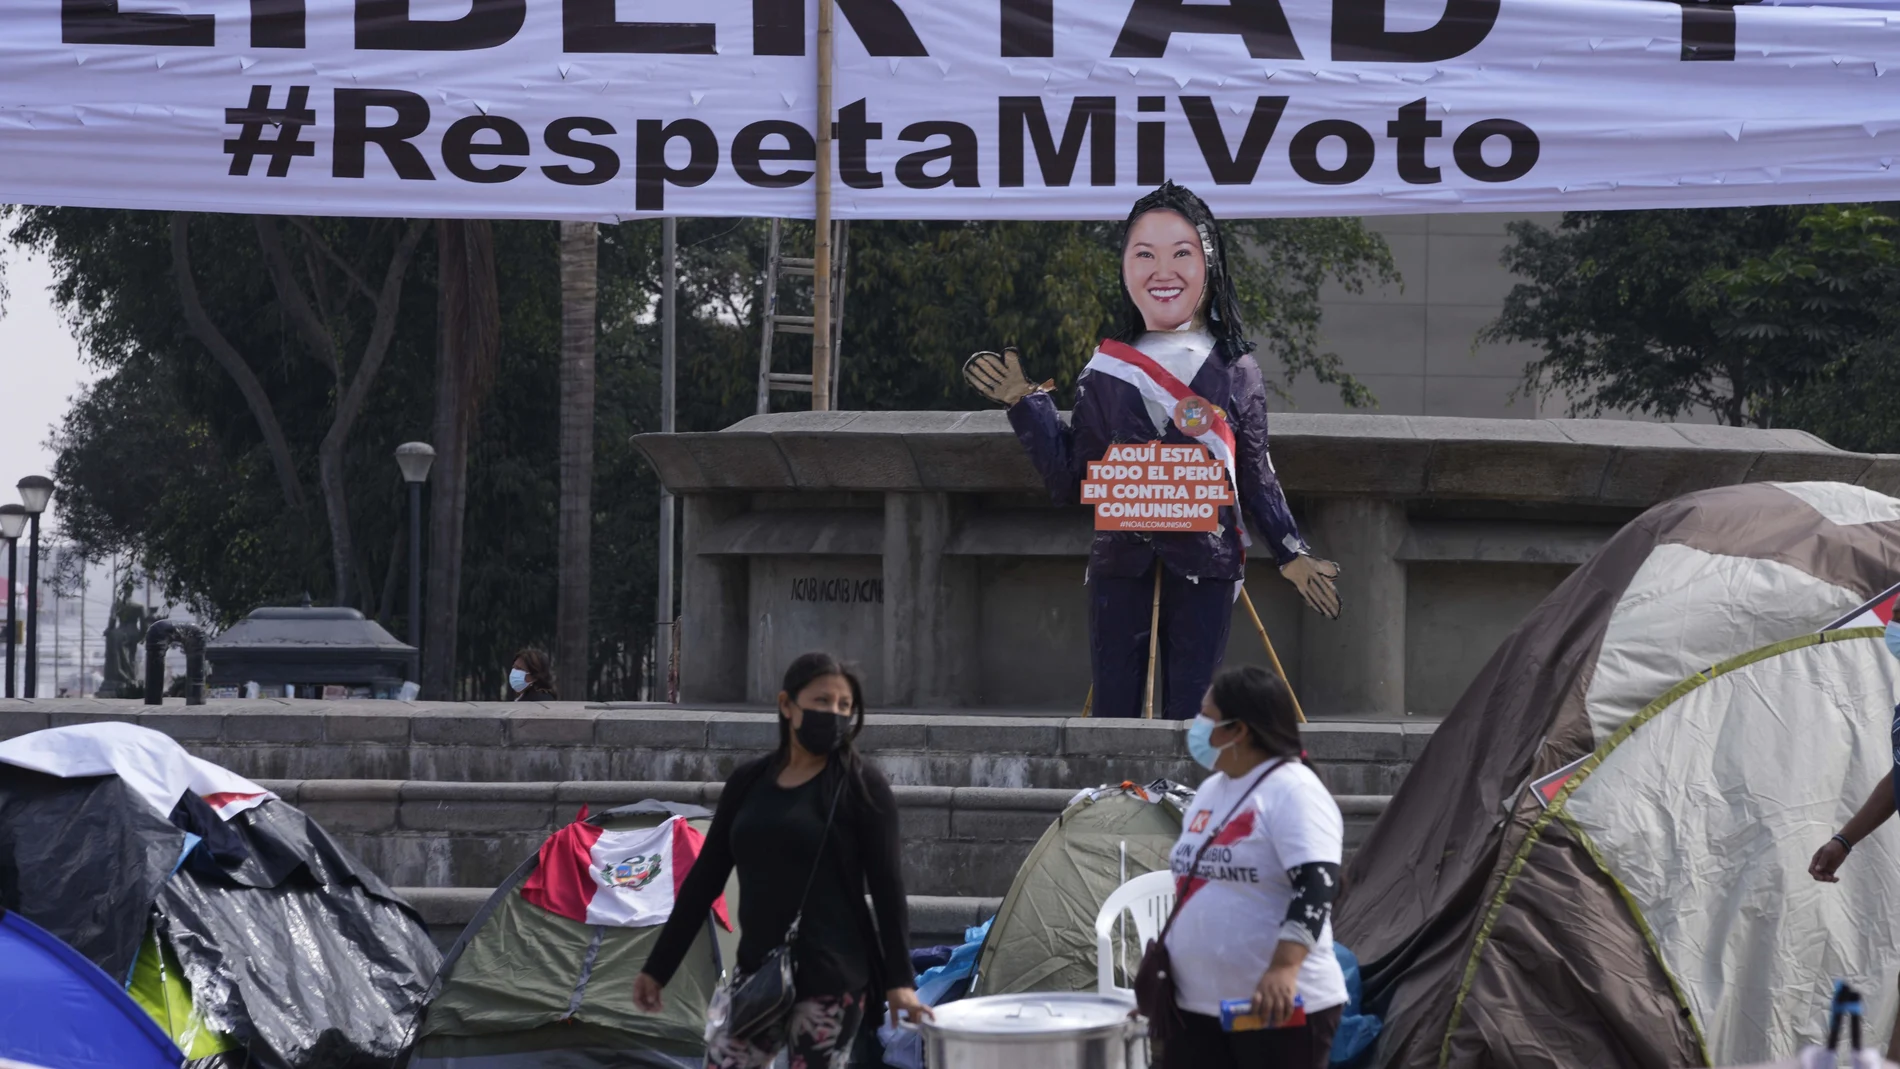 Supporters of presidential candidate Keiko Fujimori carry a large cooking pot as they camp outside the Palace of Justice, hoping to escalate claims of electoral fraud alleged by Fujimori's campaign one month after the presidential runoff election in Lima, Peru, Monday, July 12, 2021. Supporters of both presidential candidates continue to wait for an official winner of the June 6 election. The sign reads in Spanish "Freedom. Respect my vote." (AP Photo/Martin Mejia)